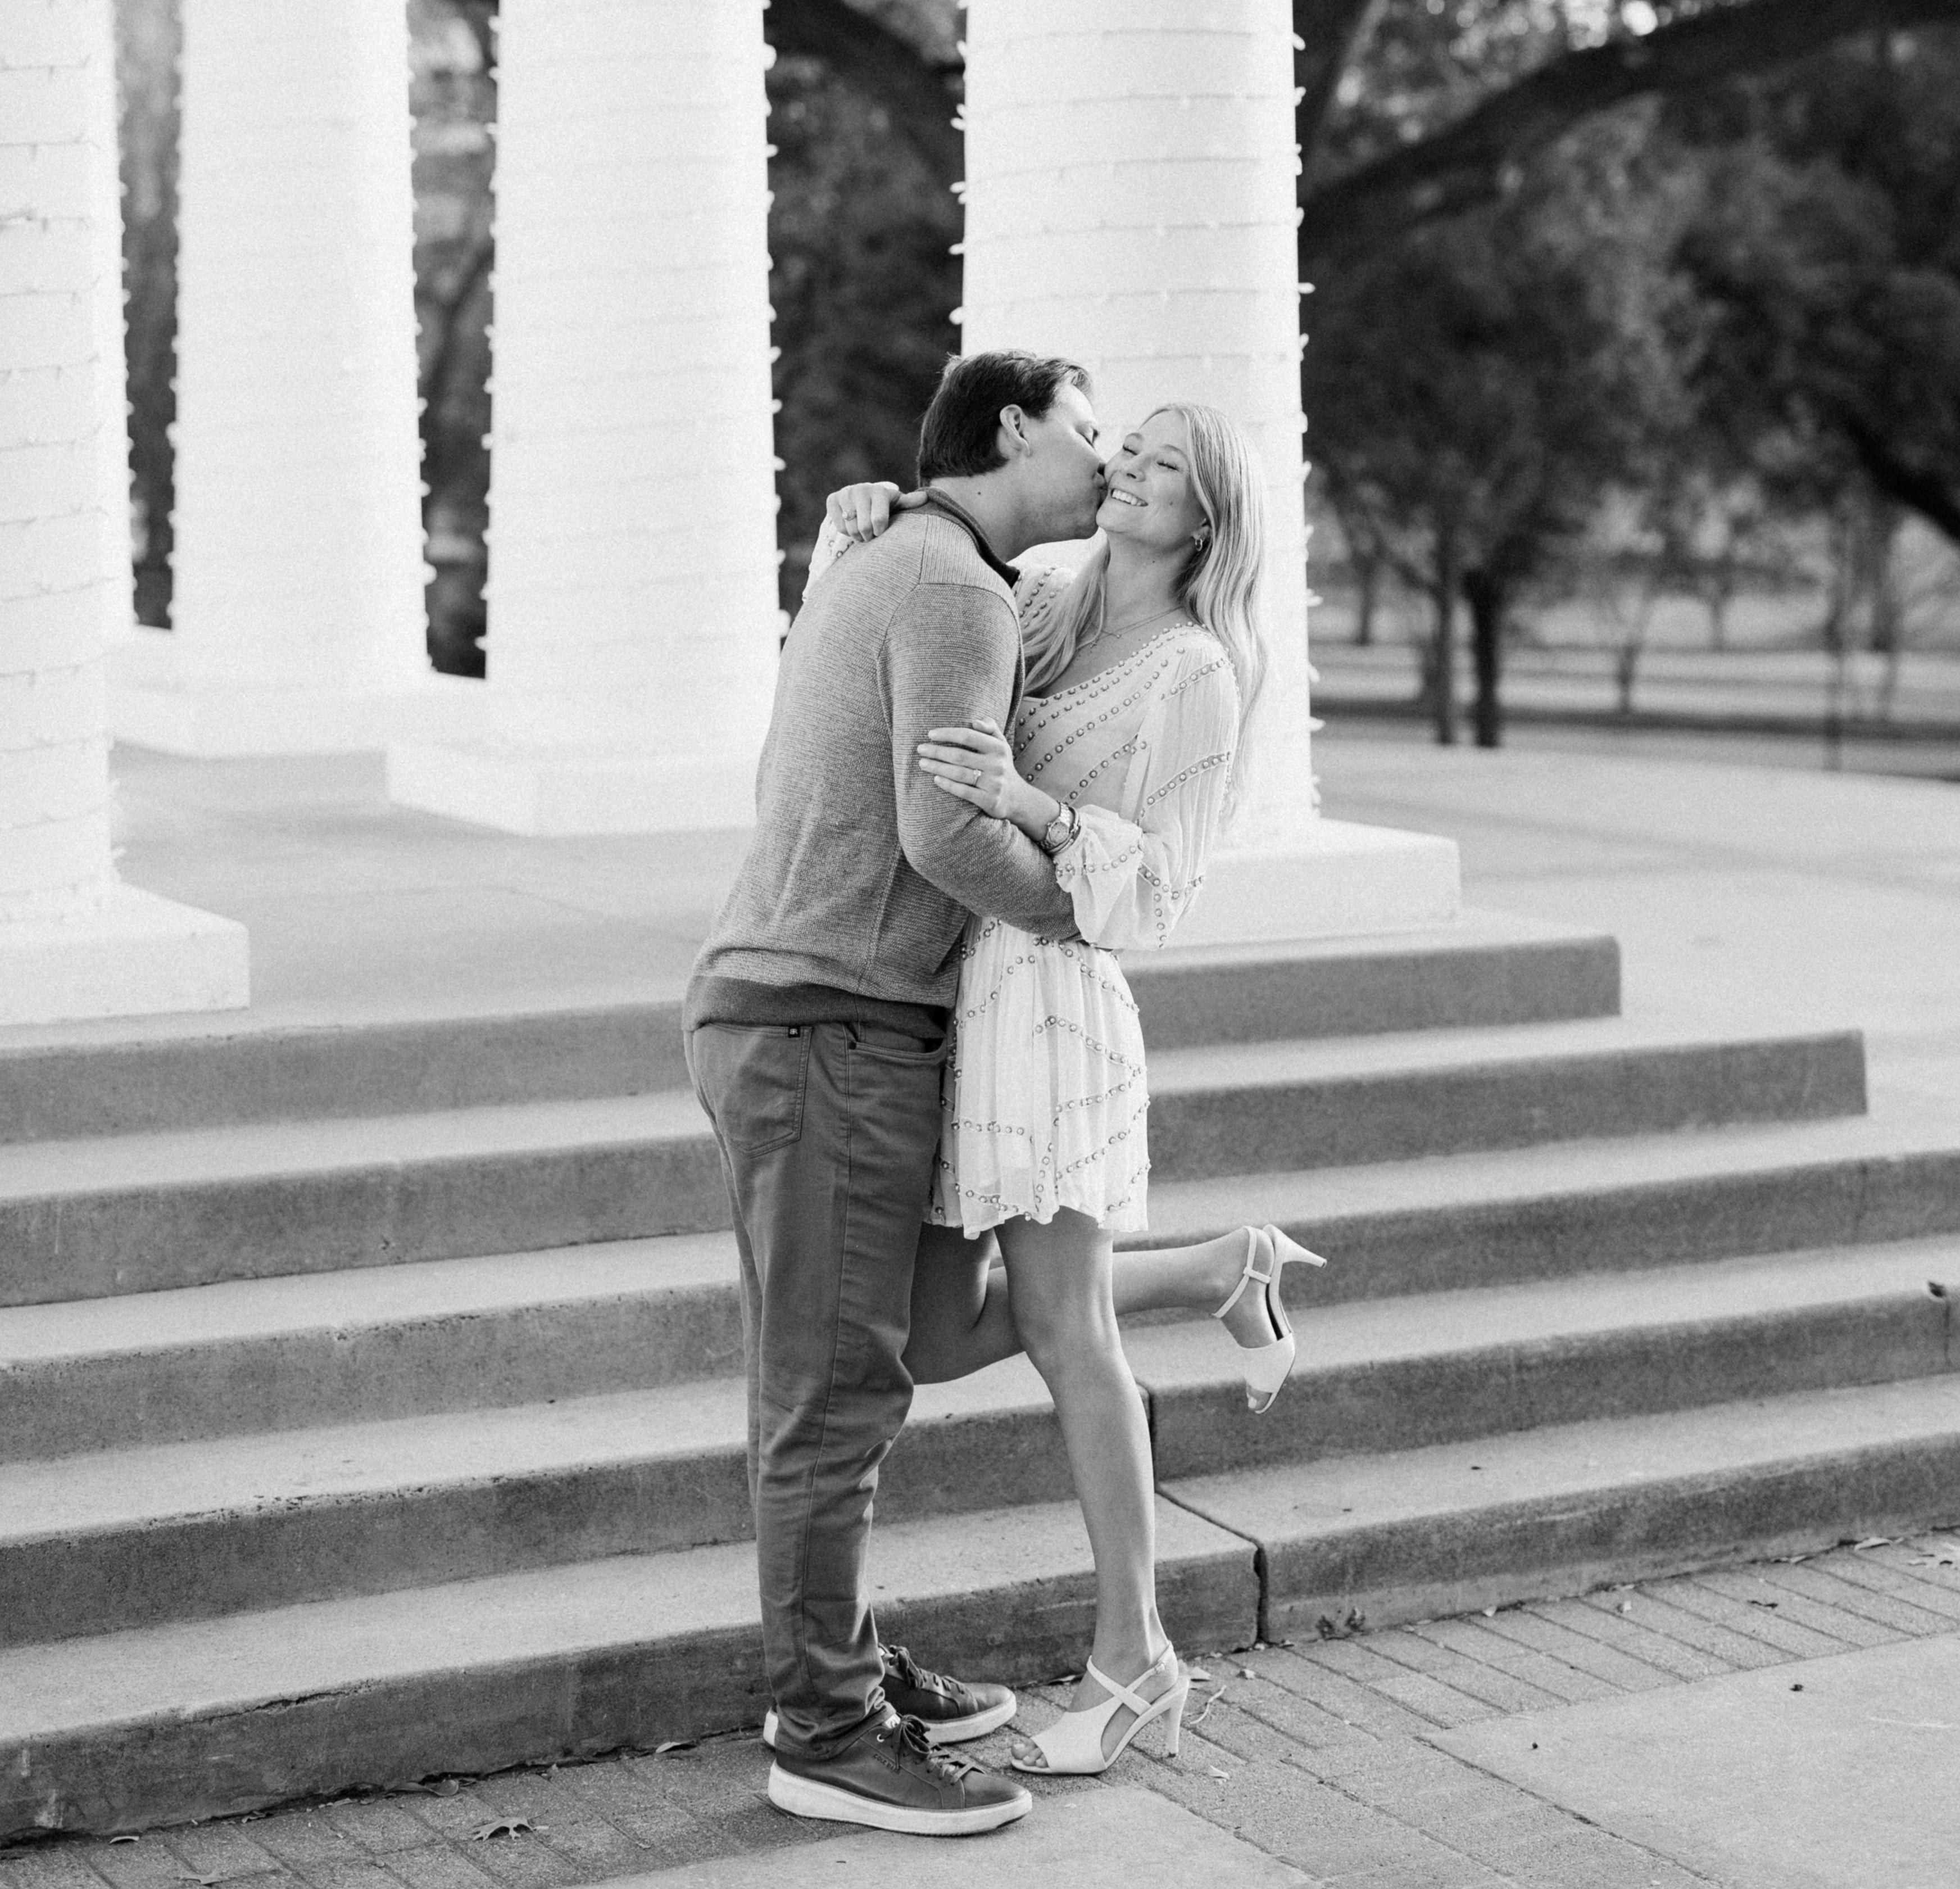 The Wedding Website of Megan Gray and Hunter Wall